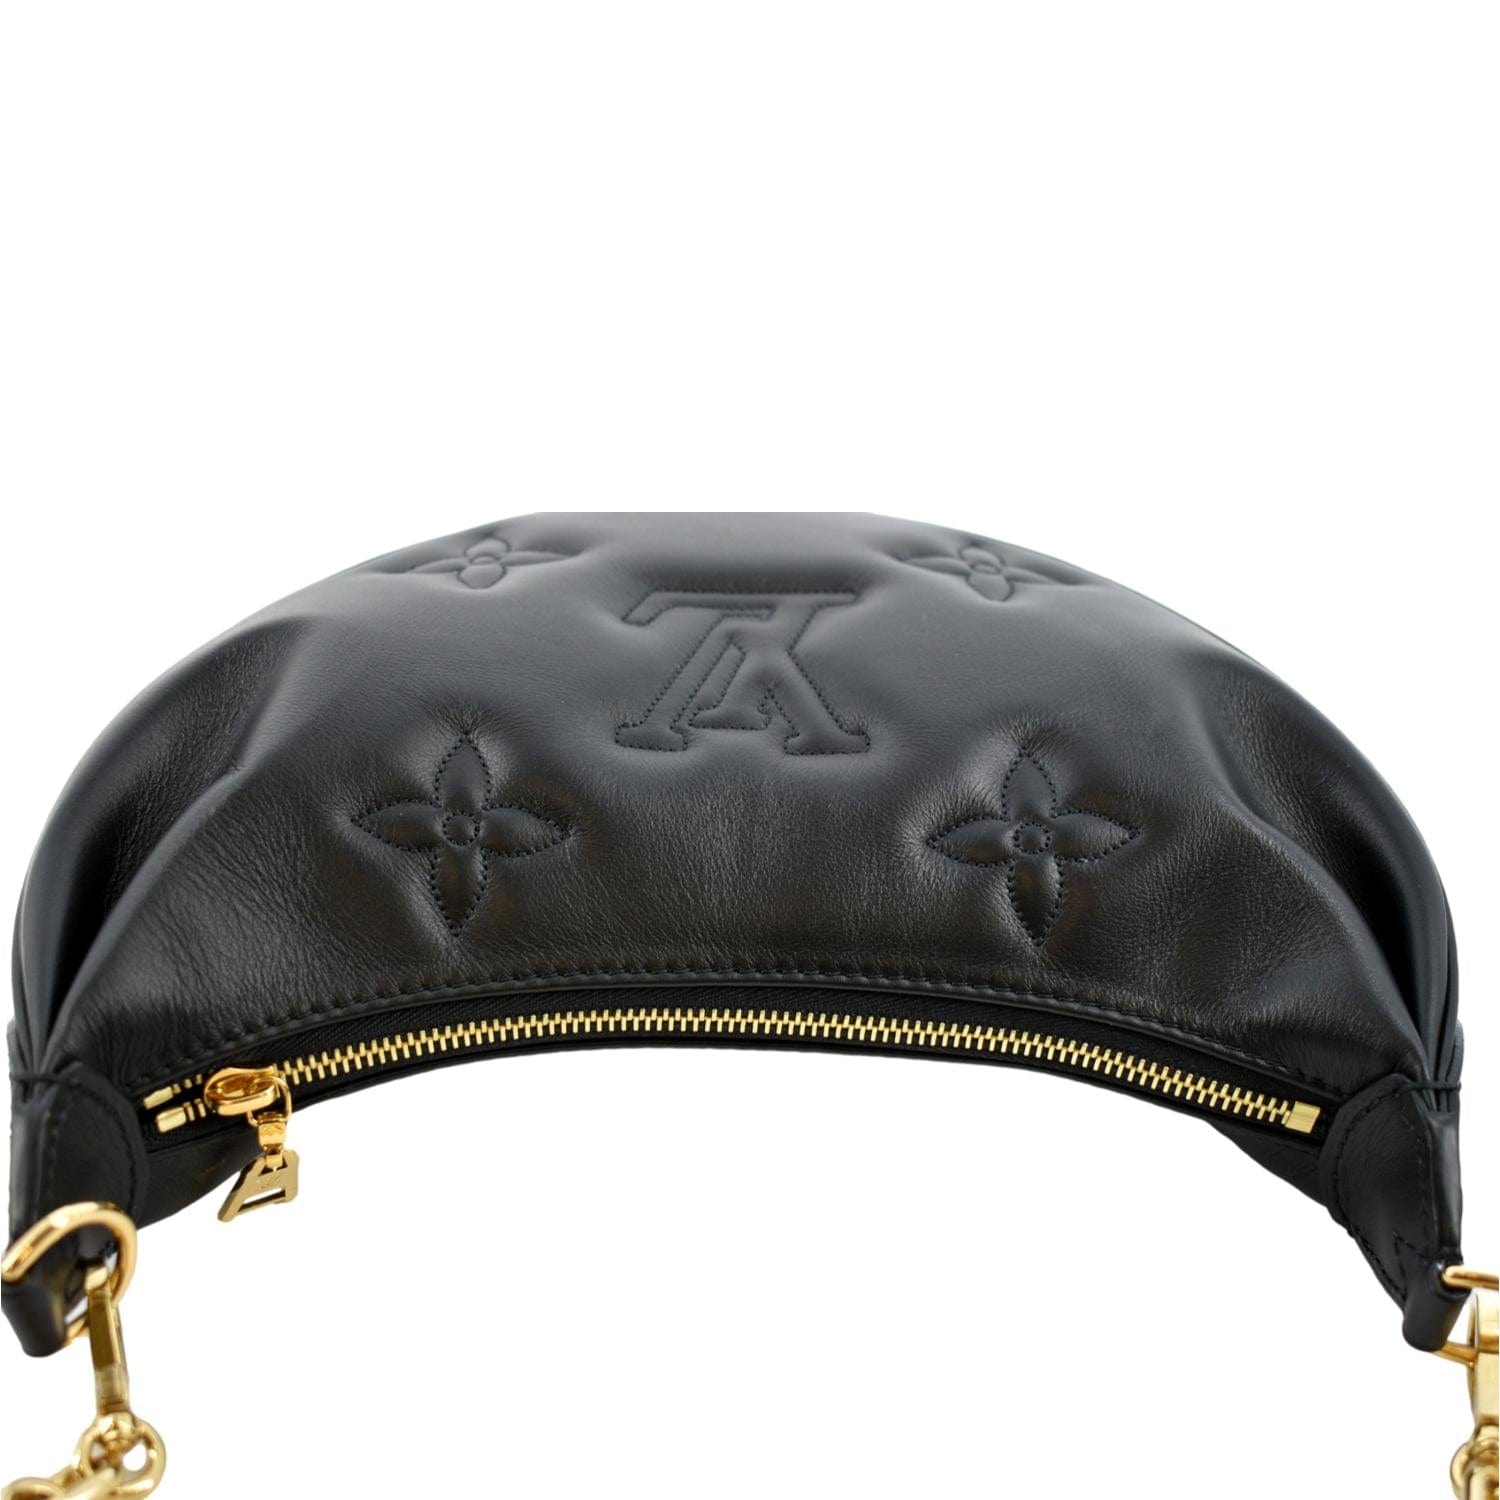 Louis Vuitton Over The Moon Bag - 4 For Sale on 1stDibs  over the moon  louis vuitton bag, lv over the moon, over the moon louis vuitton price